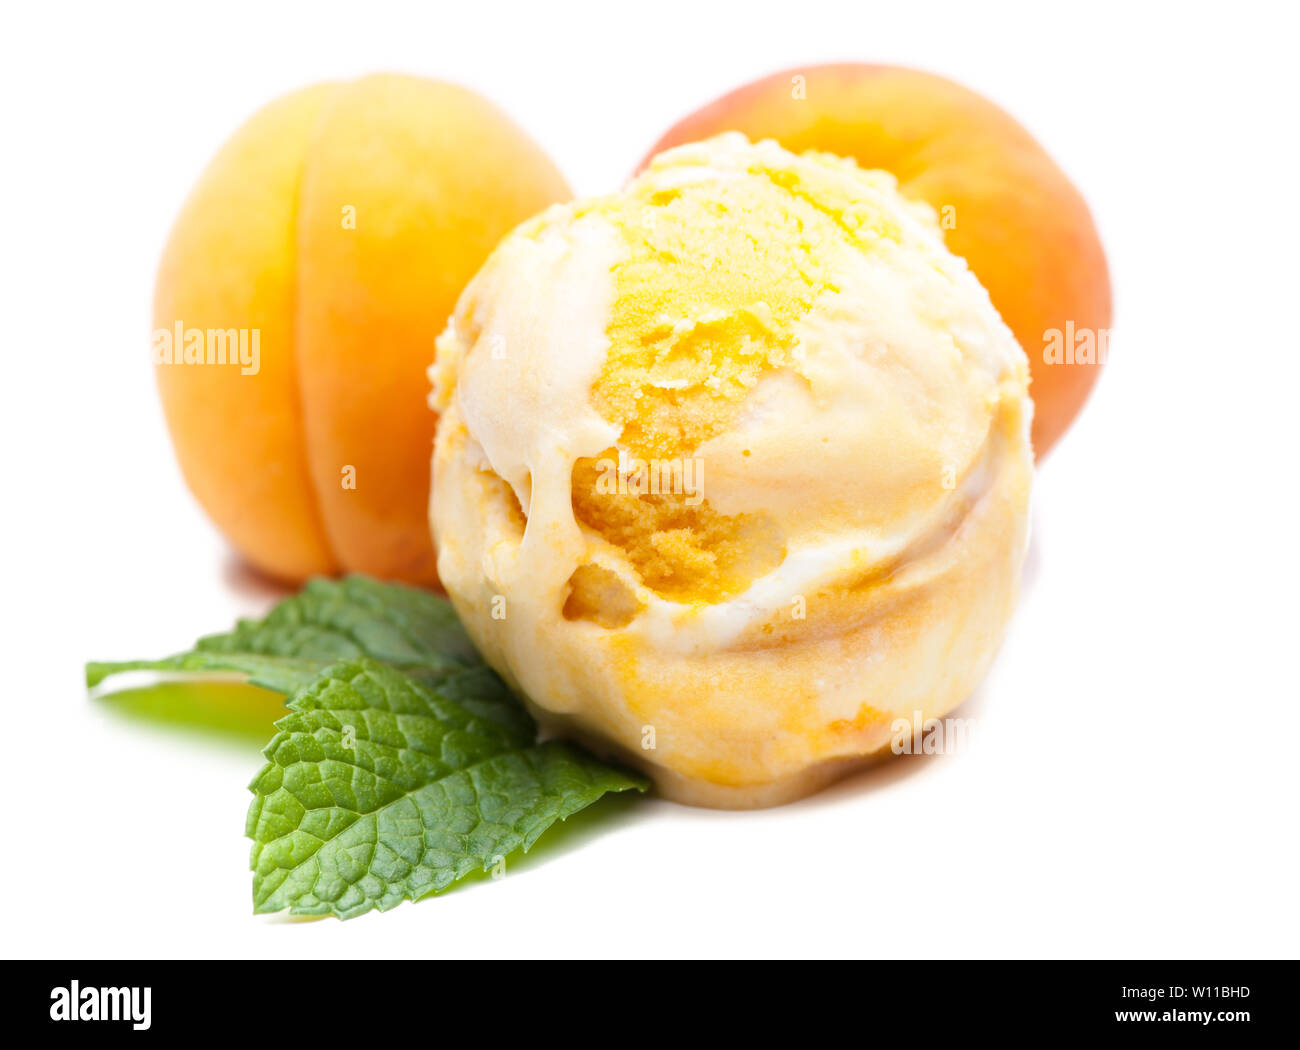 A scoop of apricot ice cream with mint and real apricots. Real edible ice cream - no artificial ingredients used Stock Photo